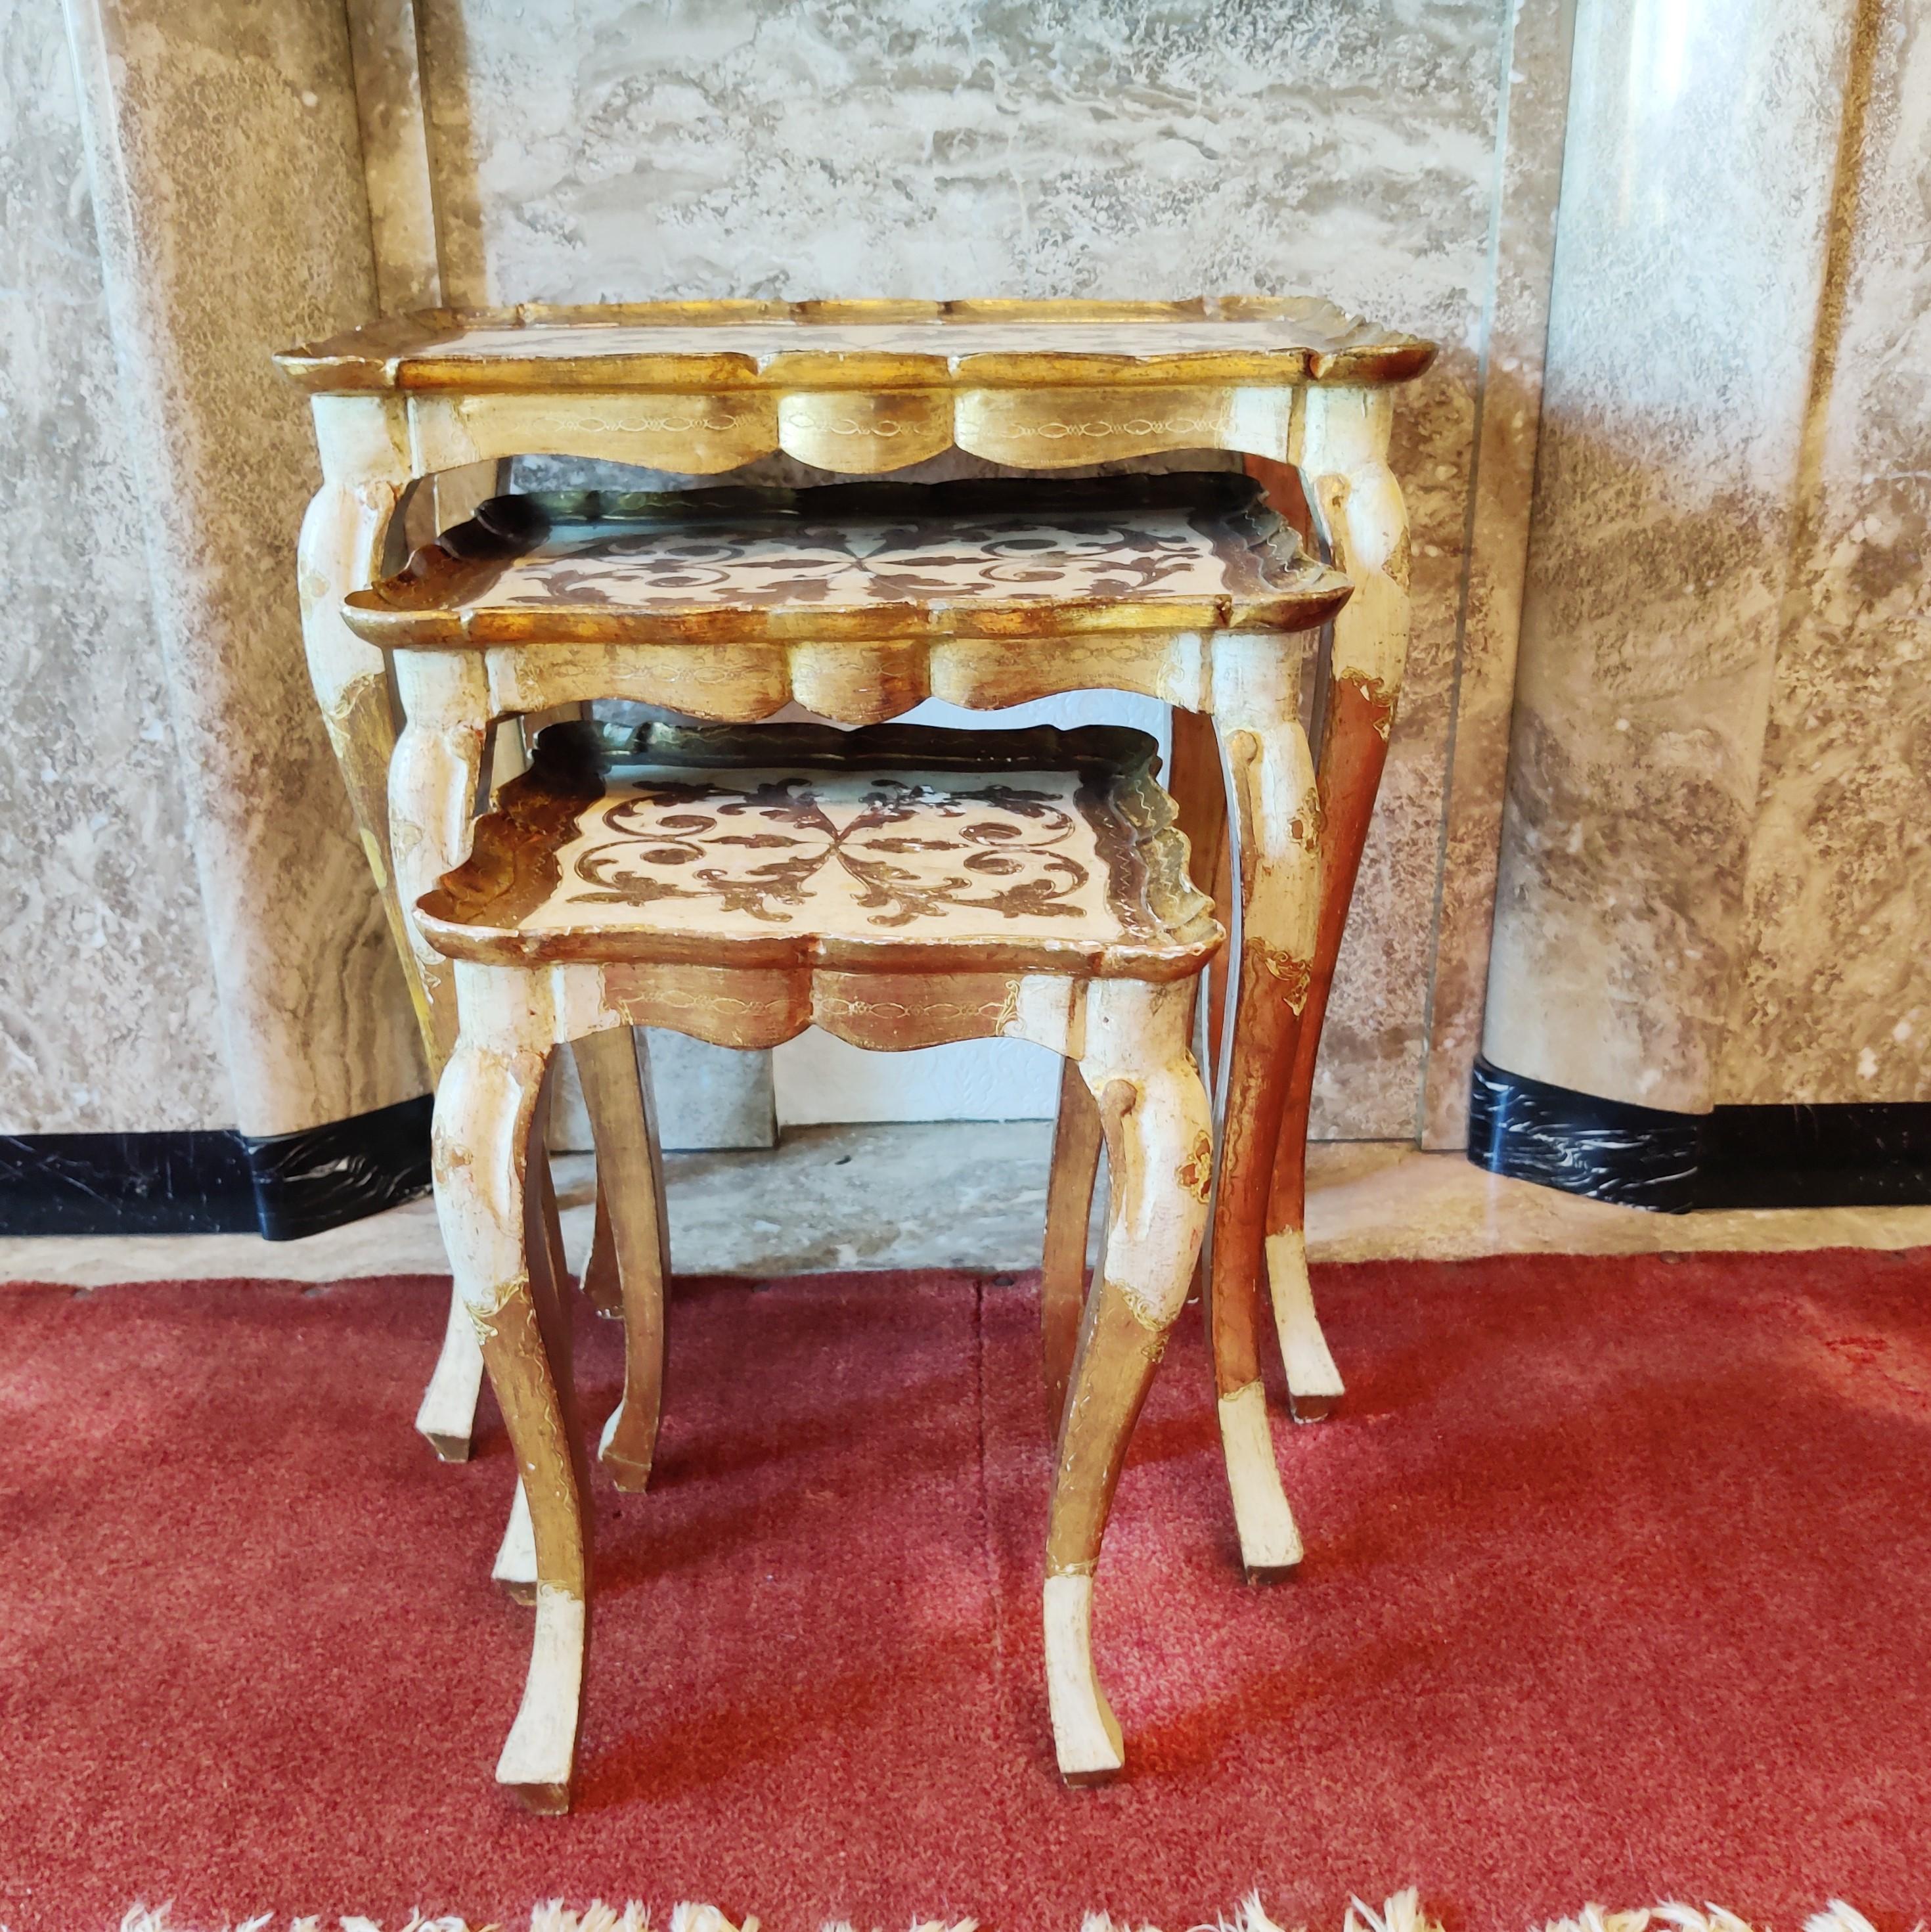 Lovely set of Italian gilt wood nesting tables with Florentine decors.

Beautifully shaped legs

Labeled

Nice patina. 

1920s, Italy, Firenze

Dimensions of the largest table:

Height 55cm/21.65